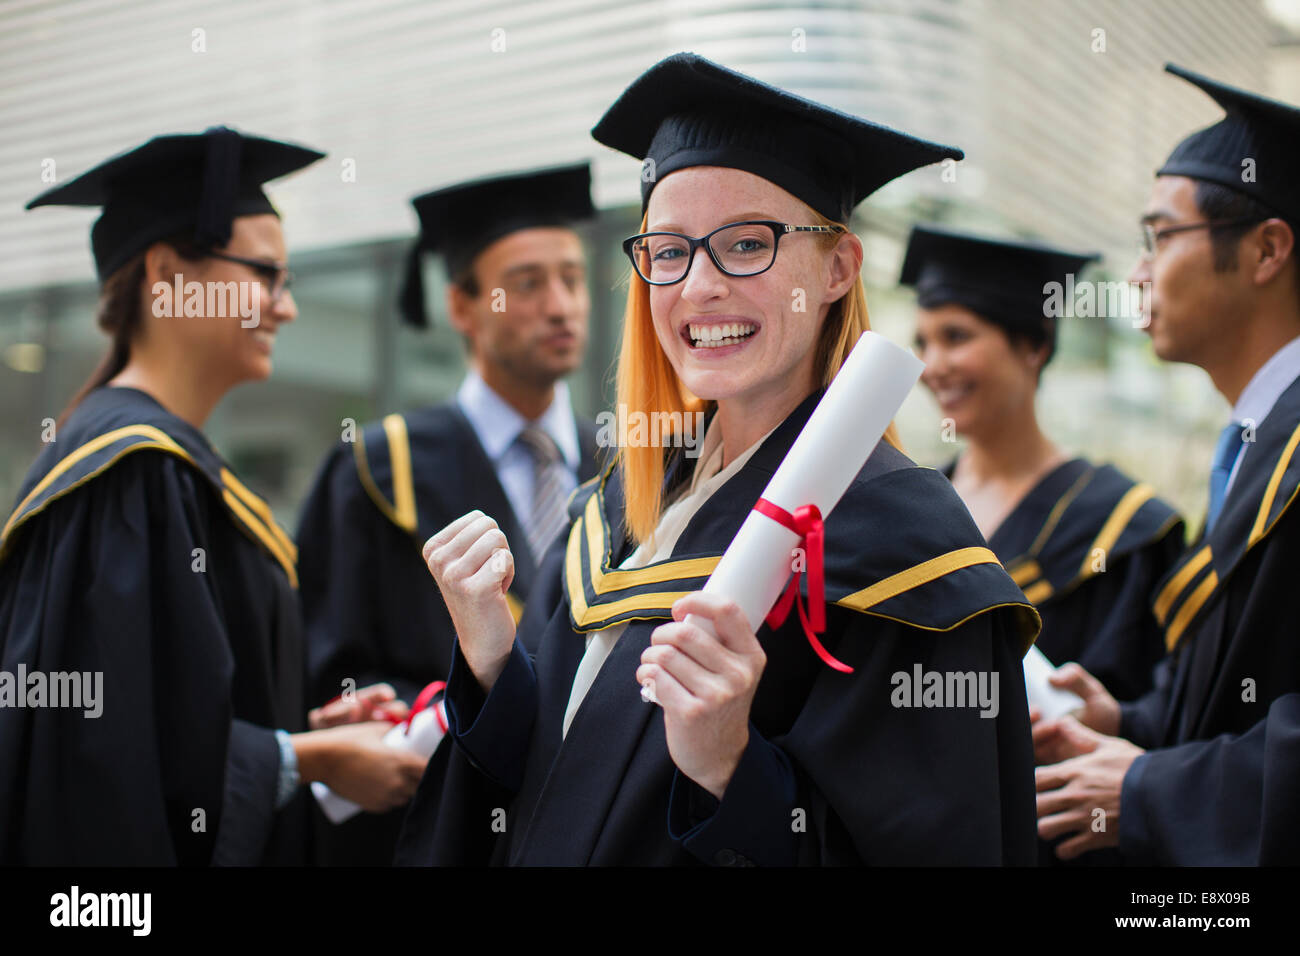 Student in cap and gown celebrating Stock Photo